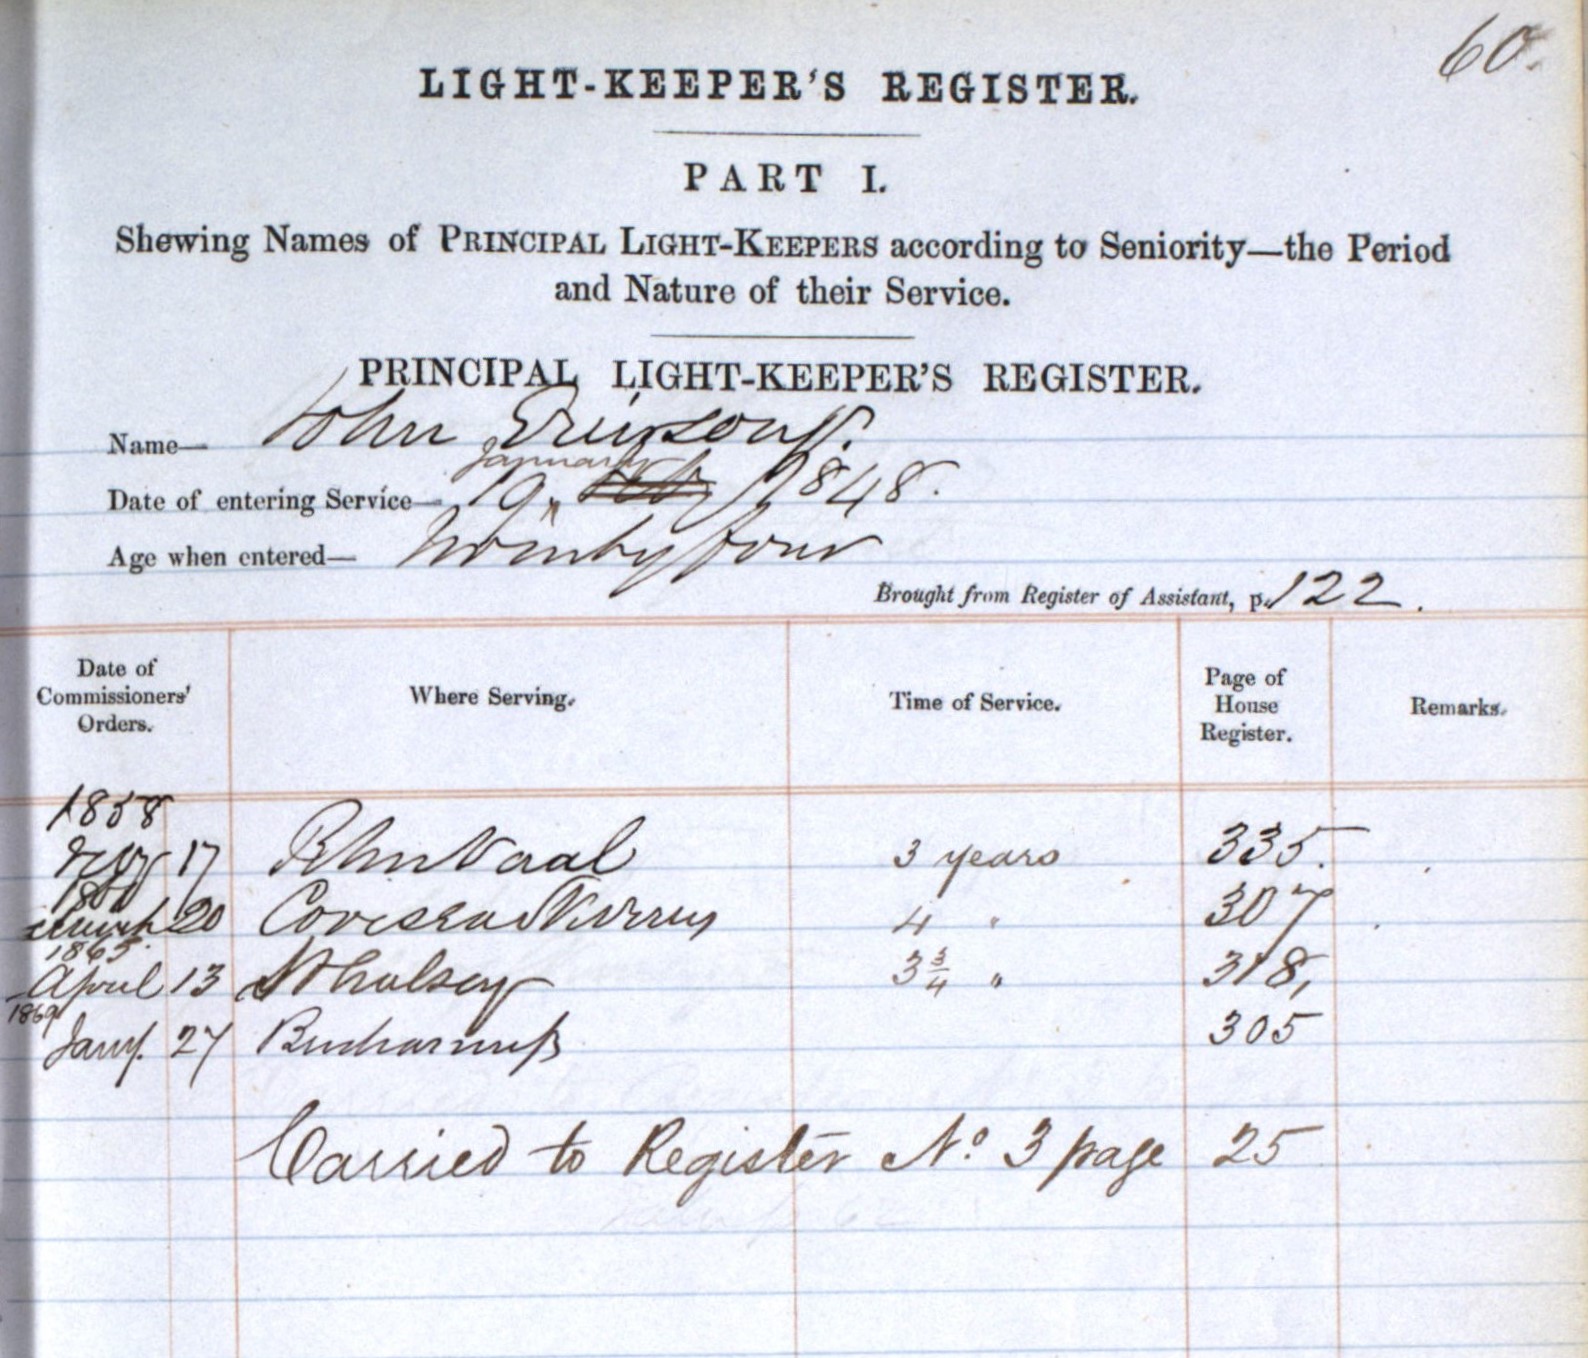 John Grierson's (junior) record of work for the Northern Lighthouse Board